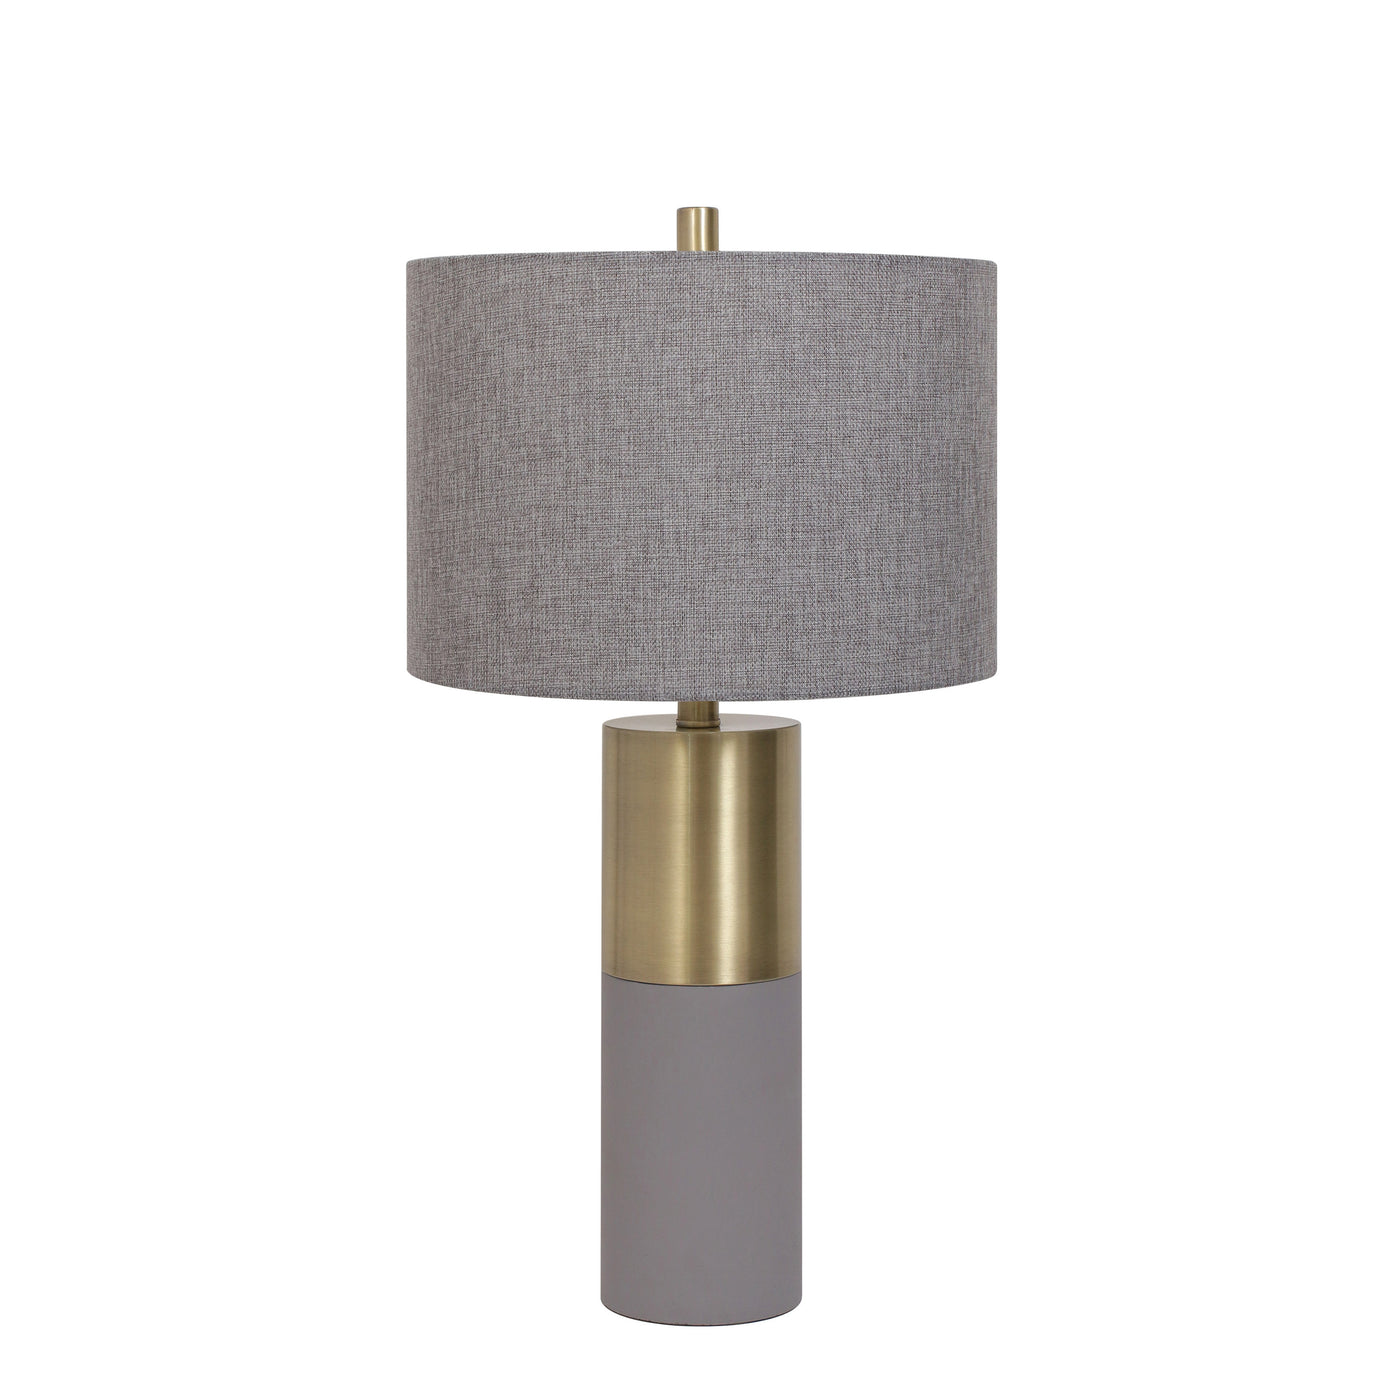 Barnes 26" Table Lamp - Grey Ceramic and Antique Brass